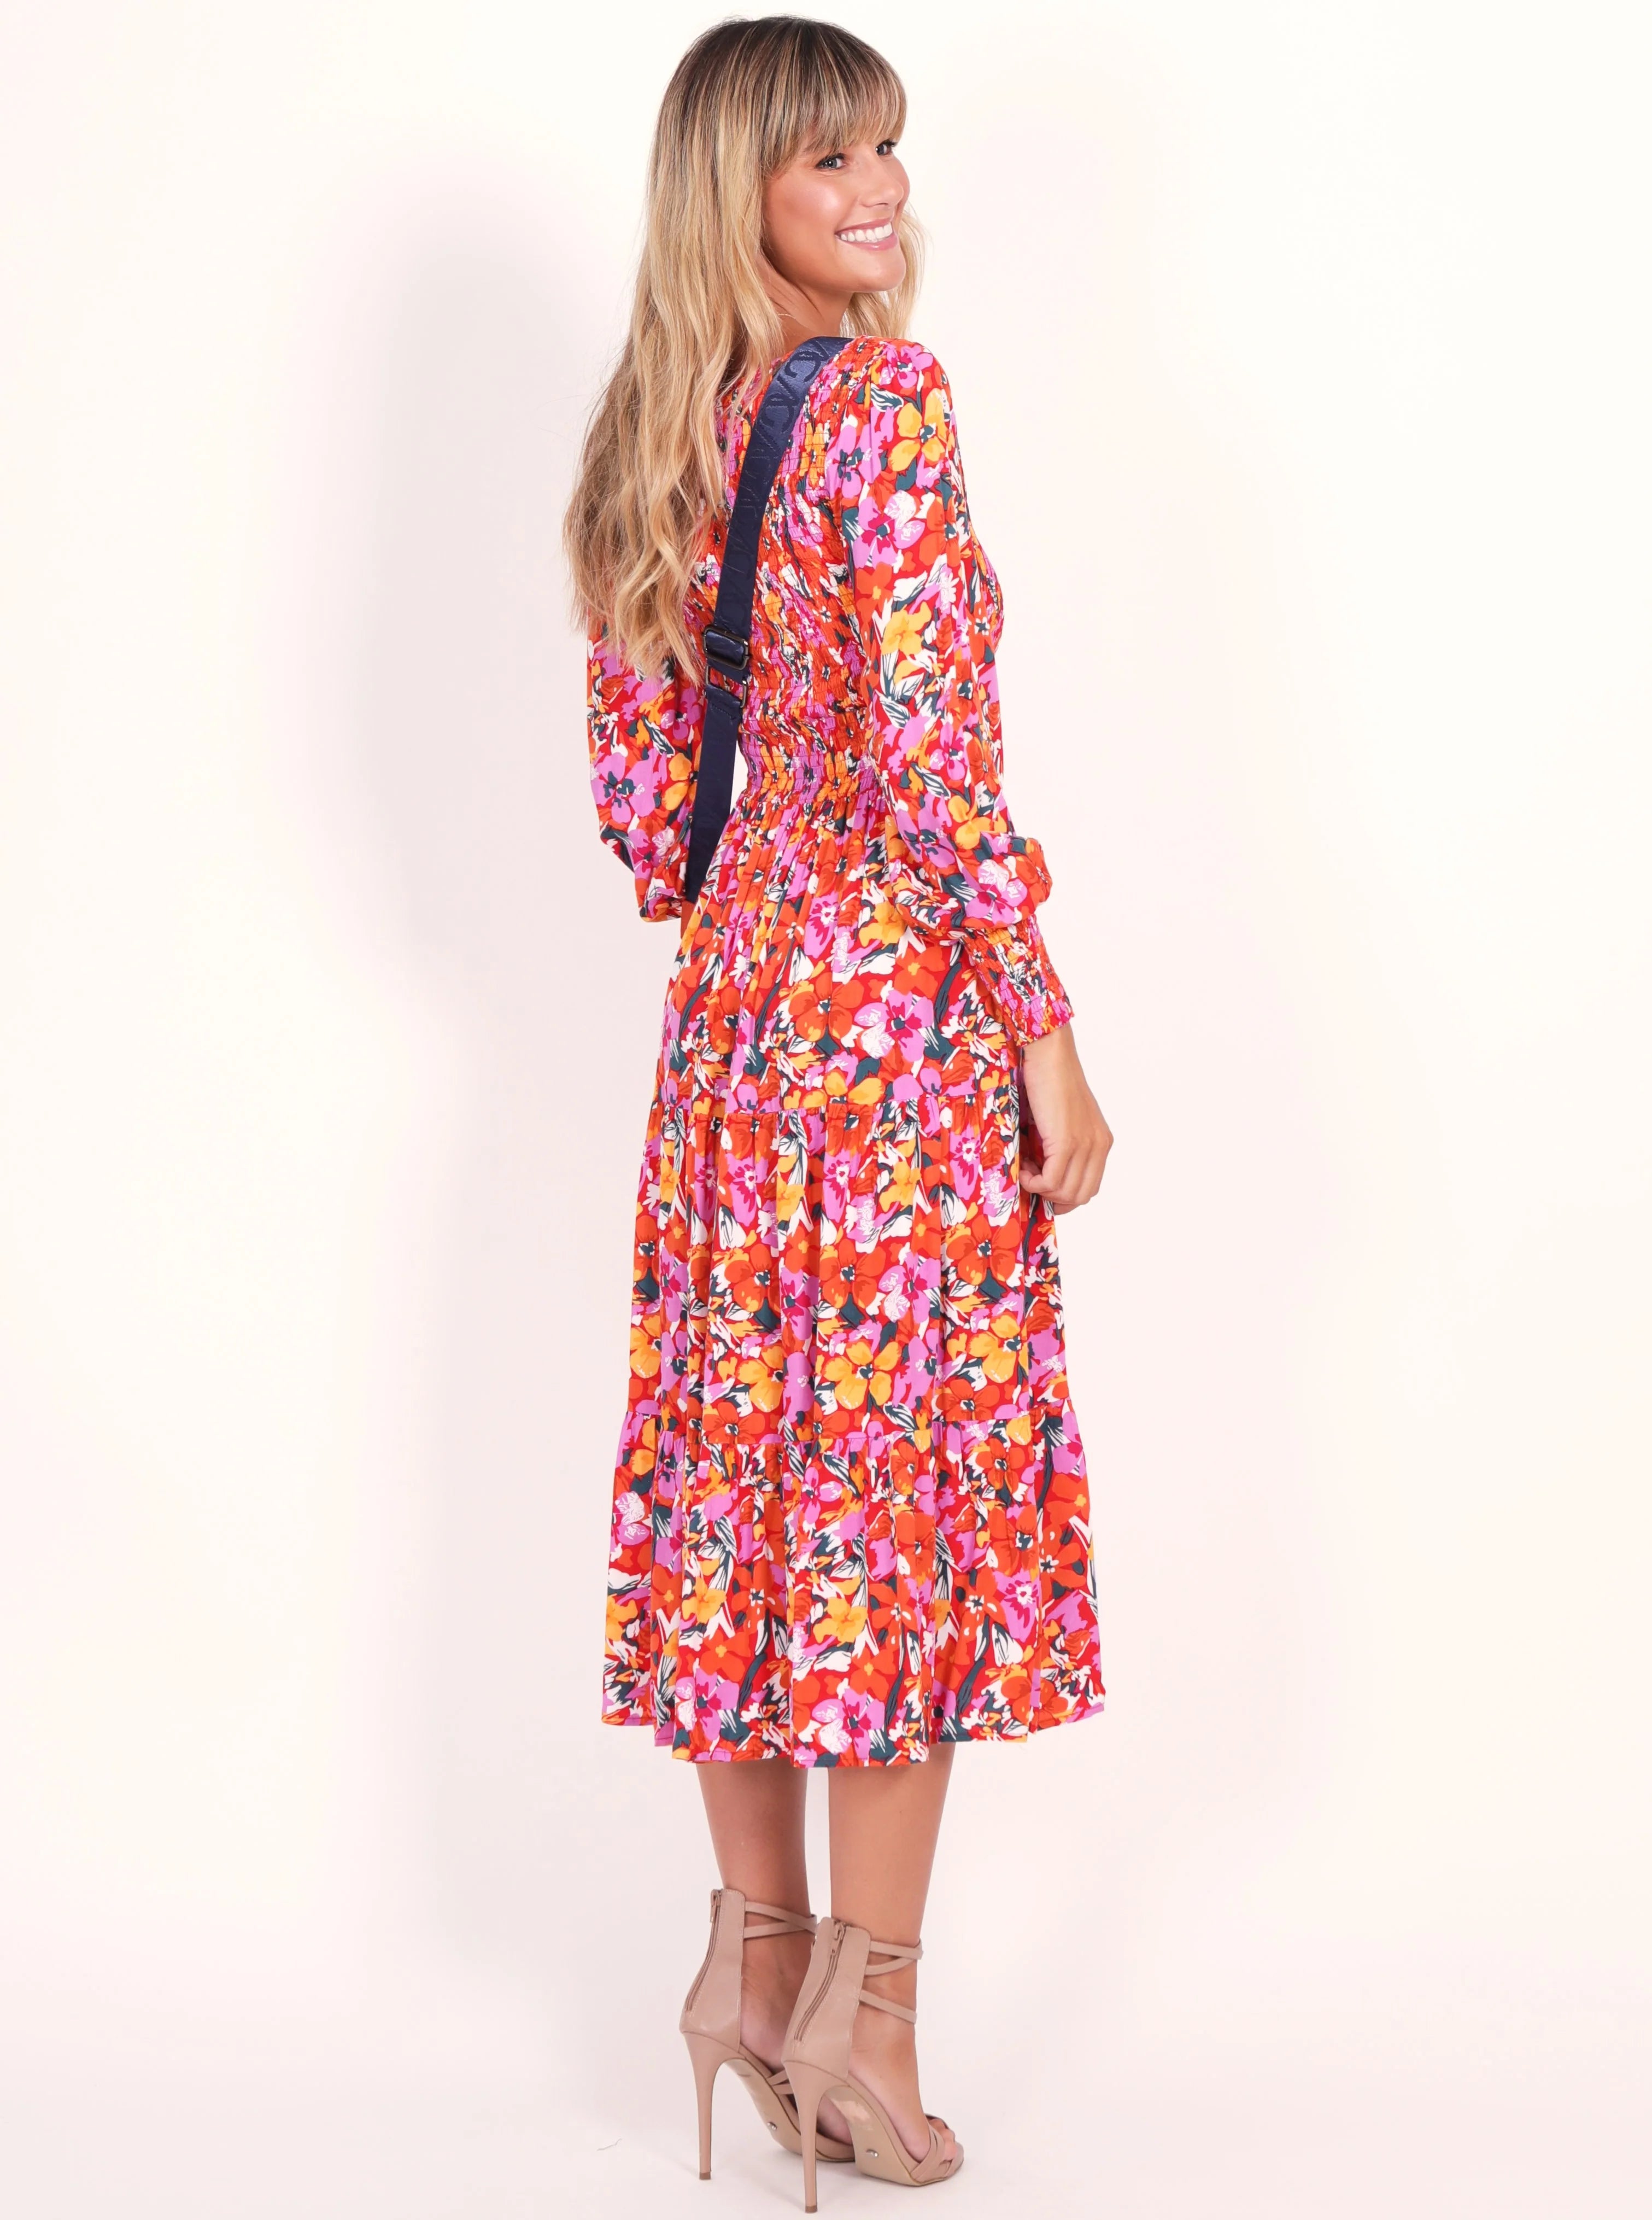 Phoenix Dress (Pink Floral) - Something For Me​​